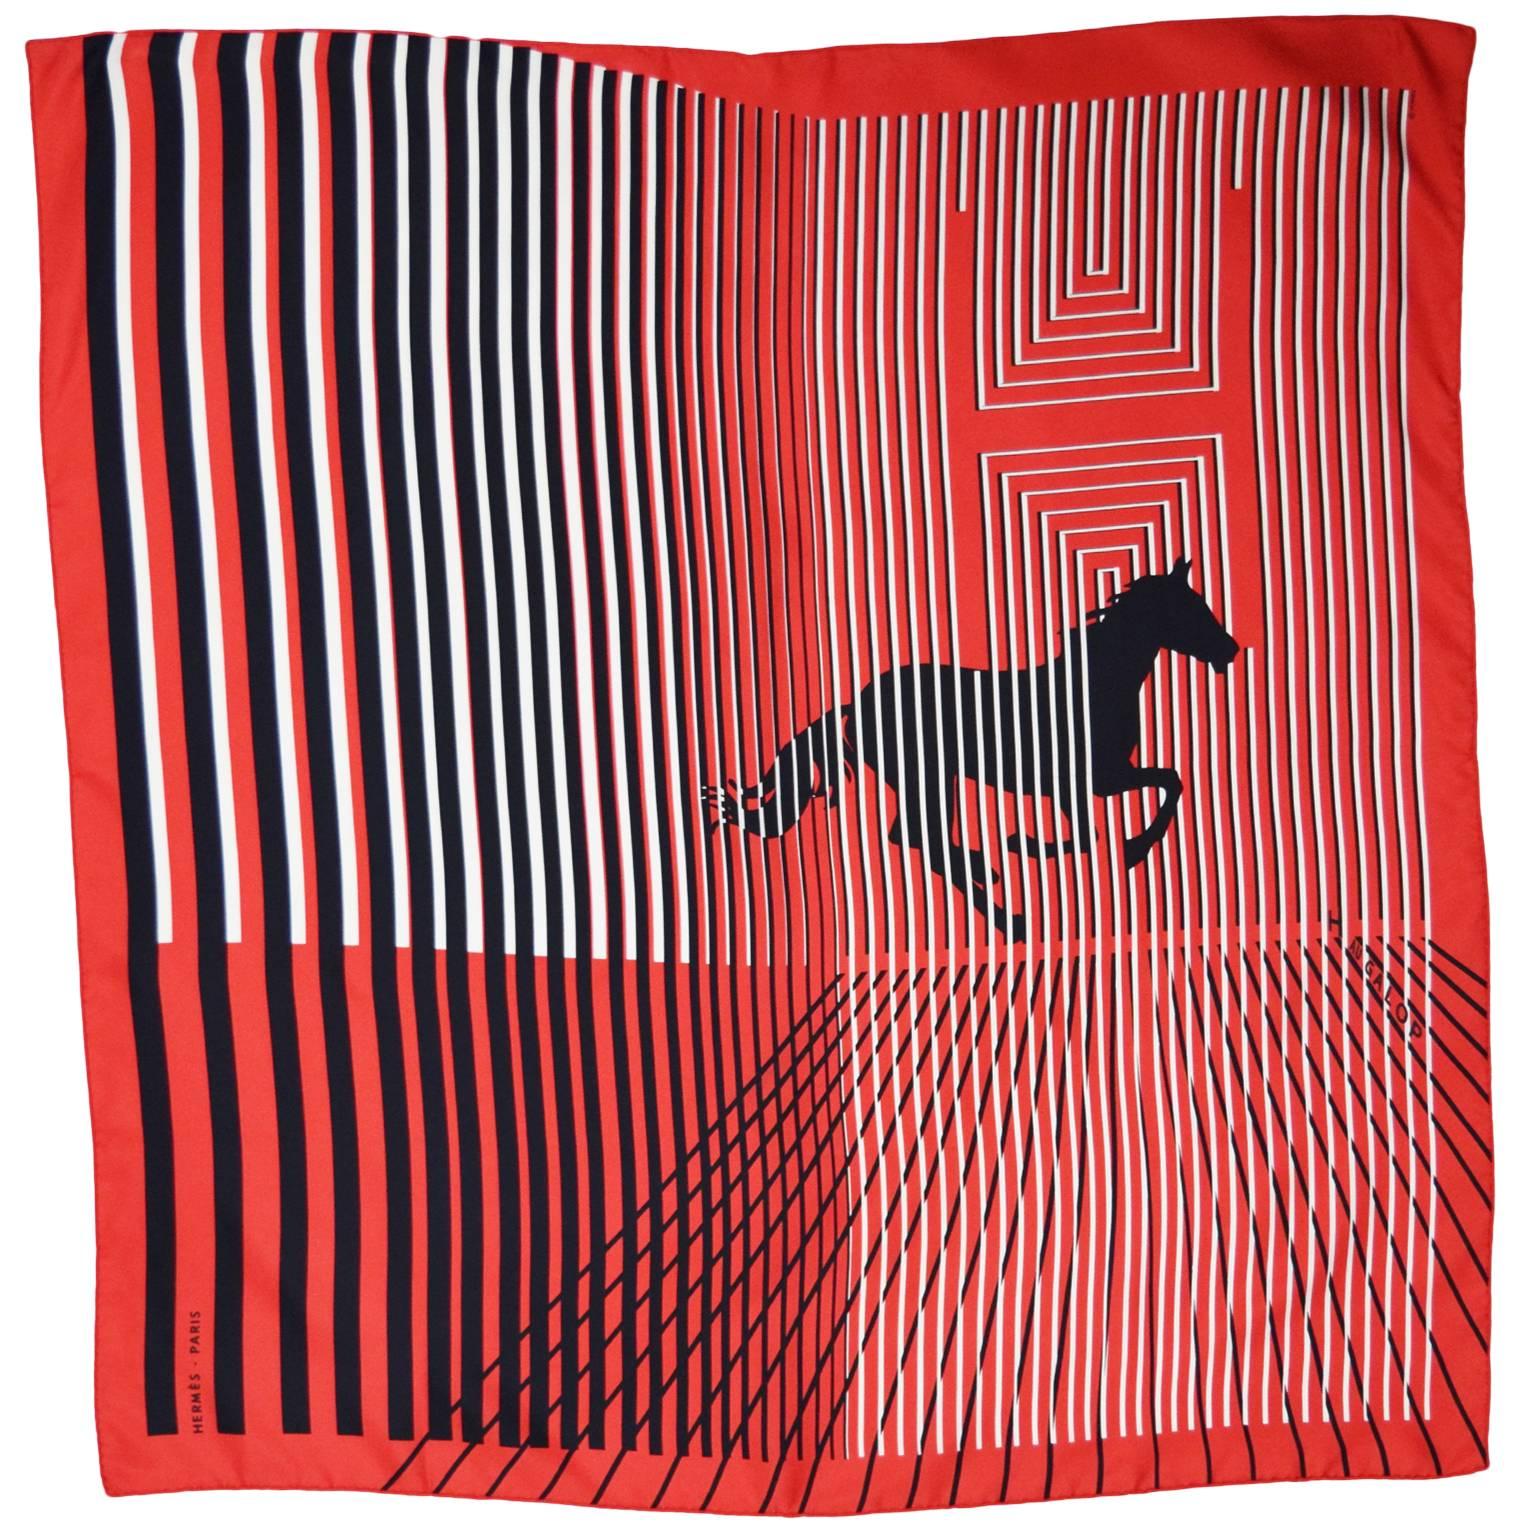 Hermes Black, Red, and White Striped Silk Scarf with Galloping Horse Print For Sale